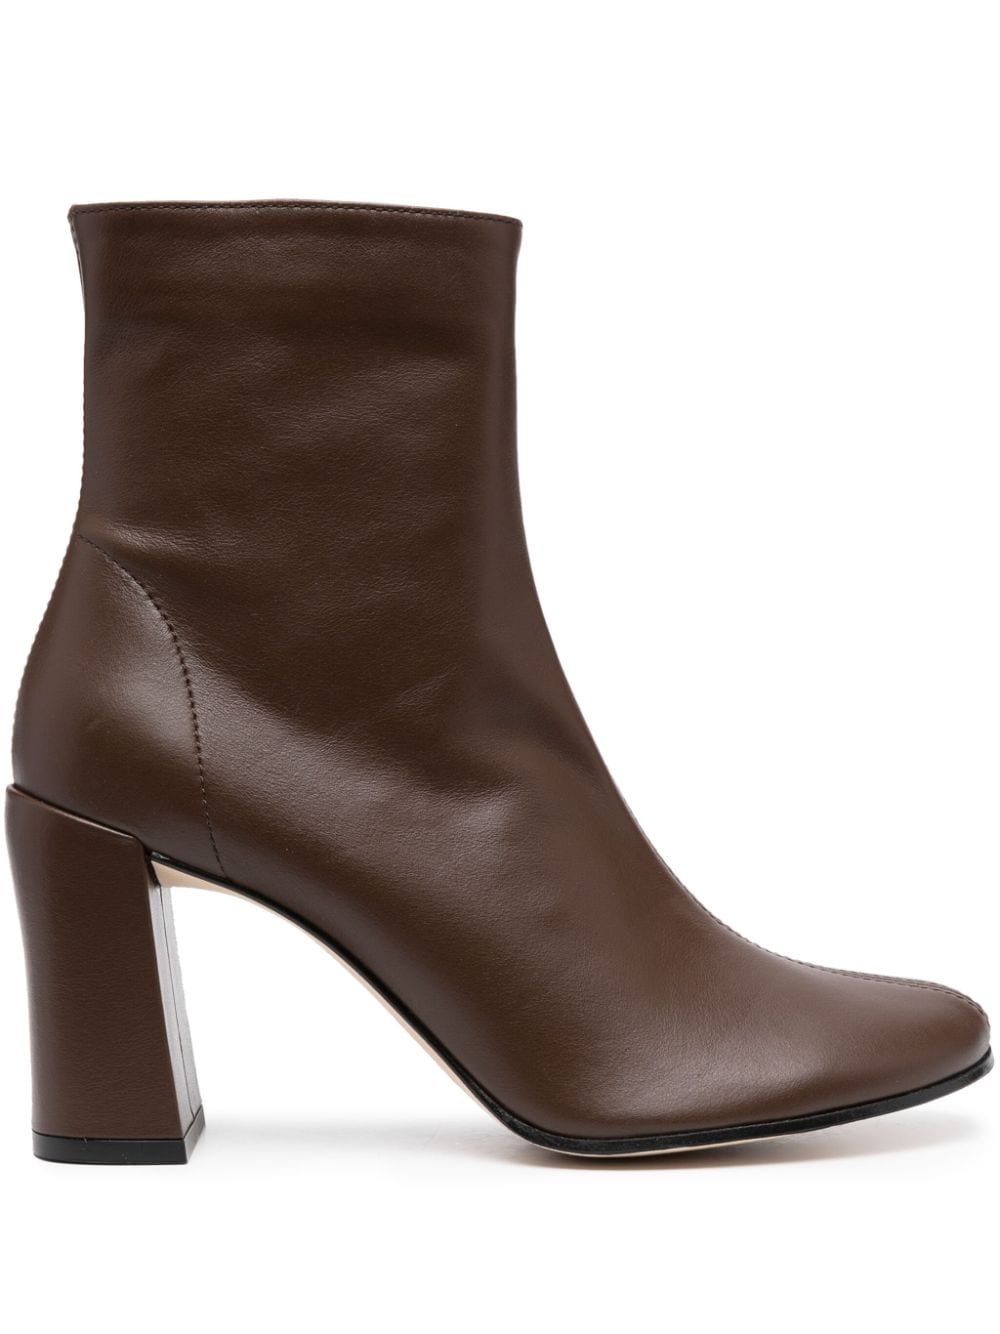 BY FAR Vlada 80mm leather ankle boots - Brown von BY FAR